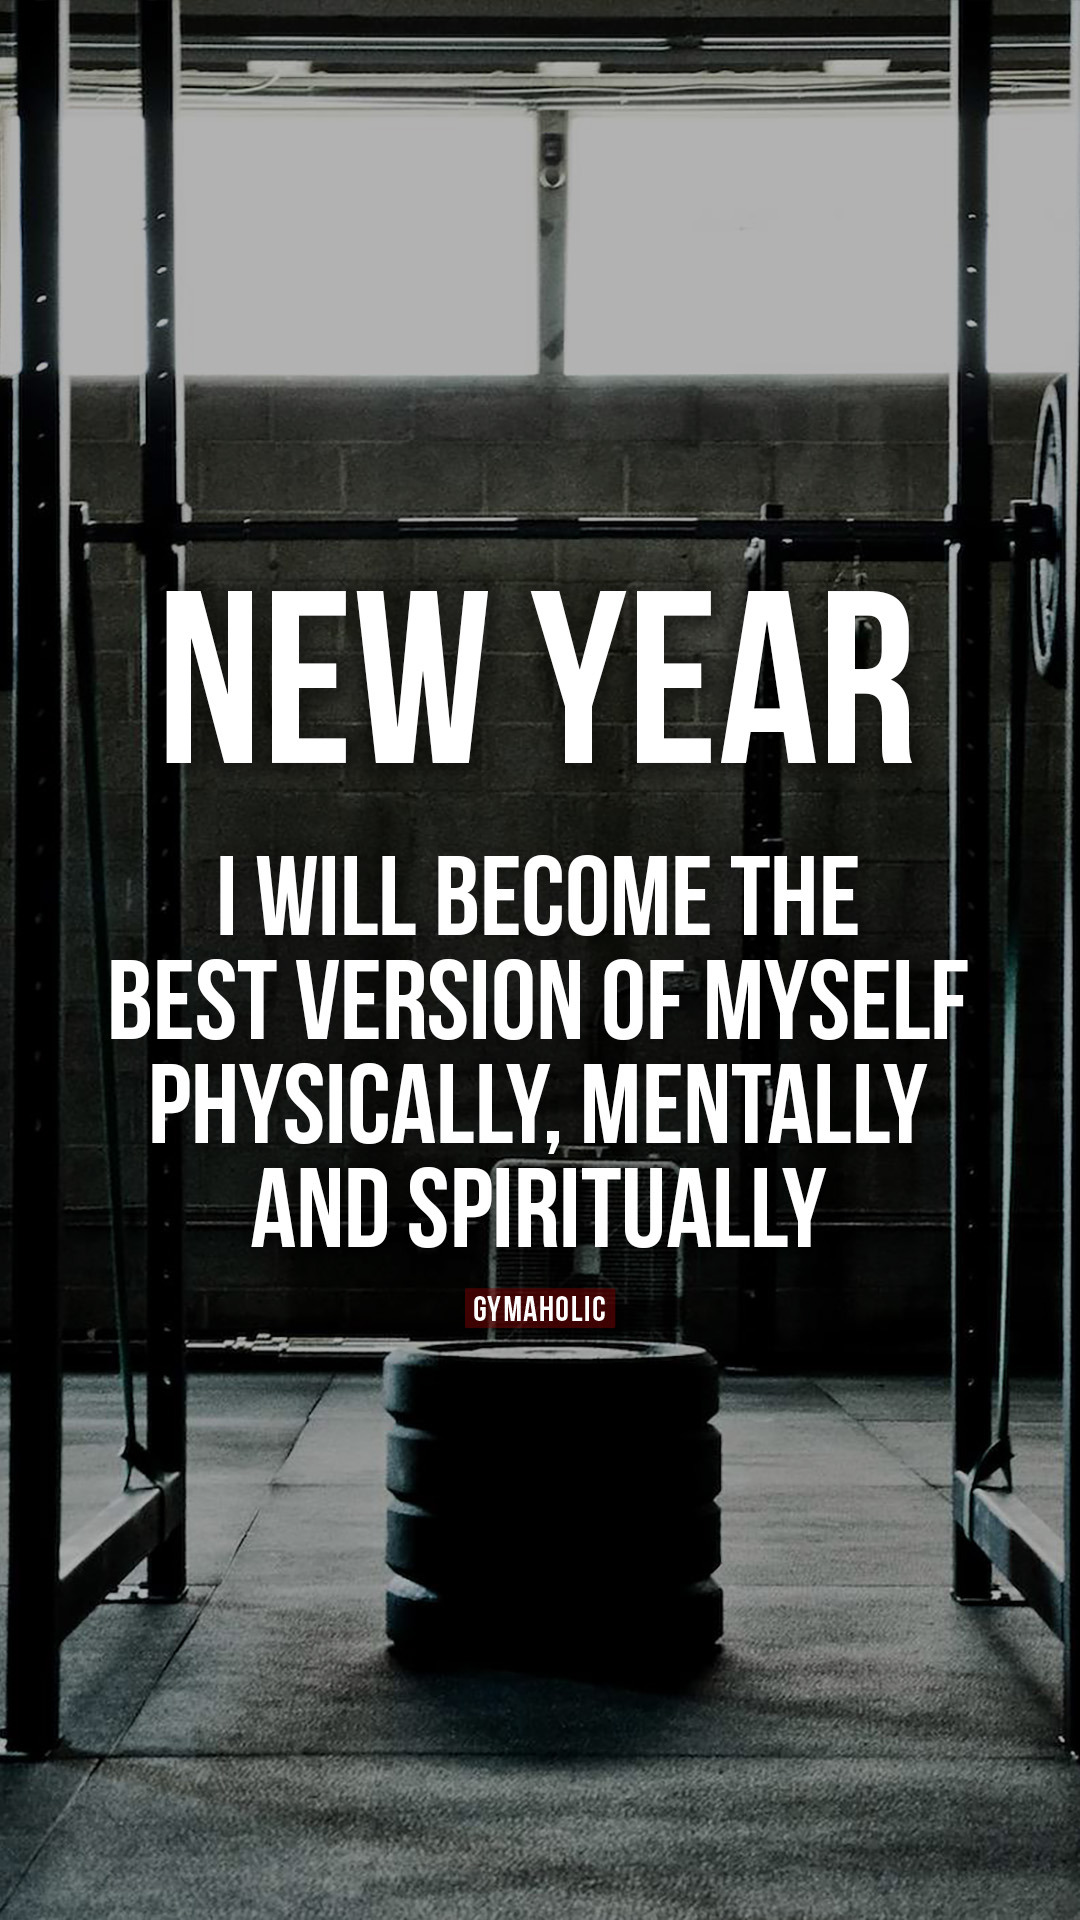 New Year: I will become the best version of myself